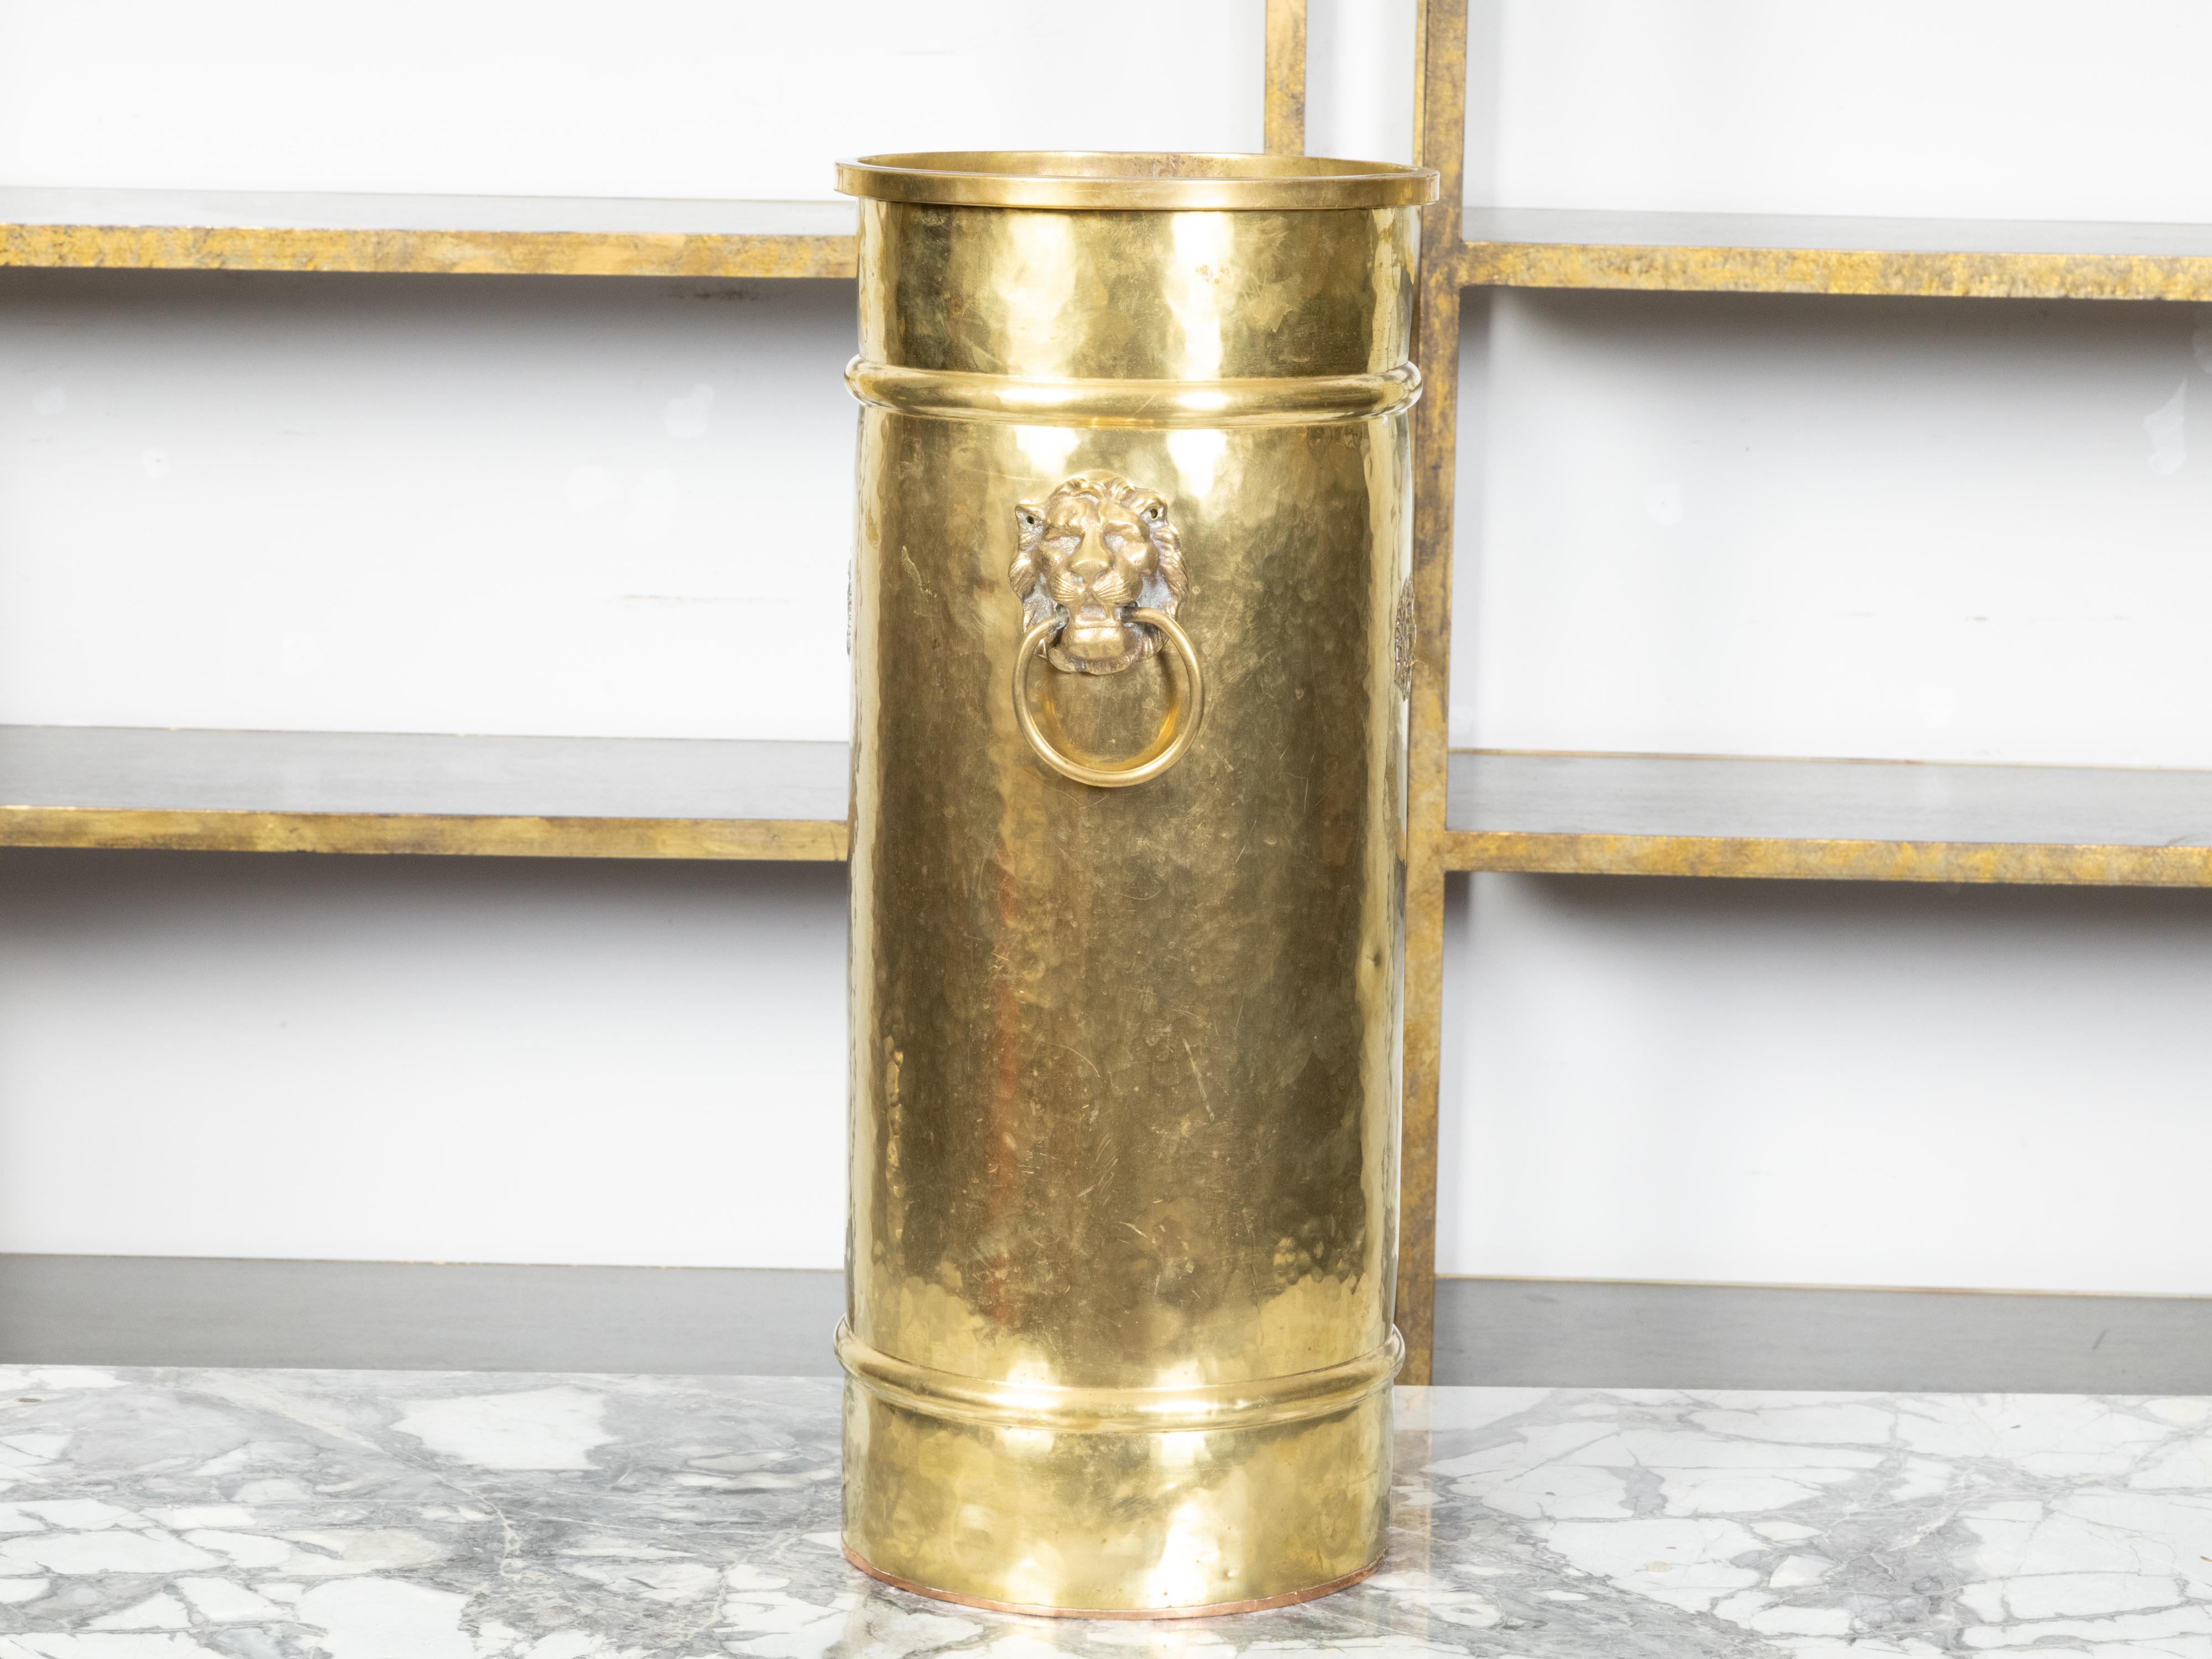 English 1920s Brass Umbrella Stand with Double-Headed Eagle Heraldic Motif 1